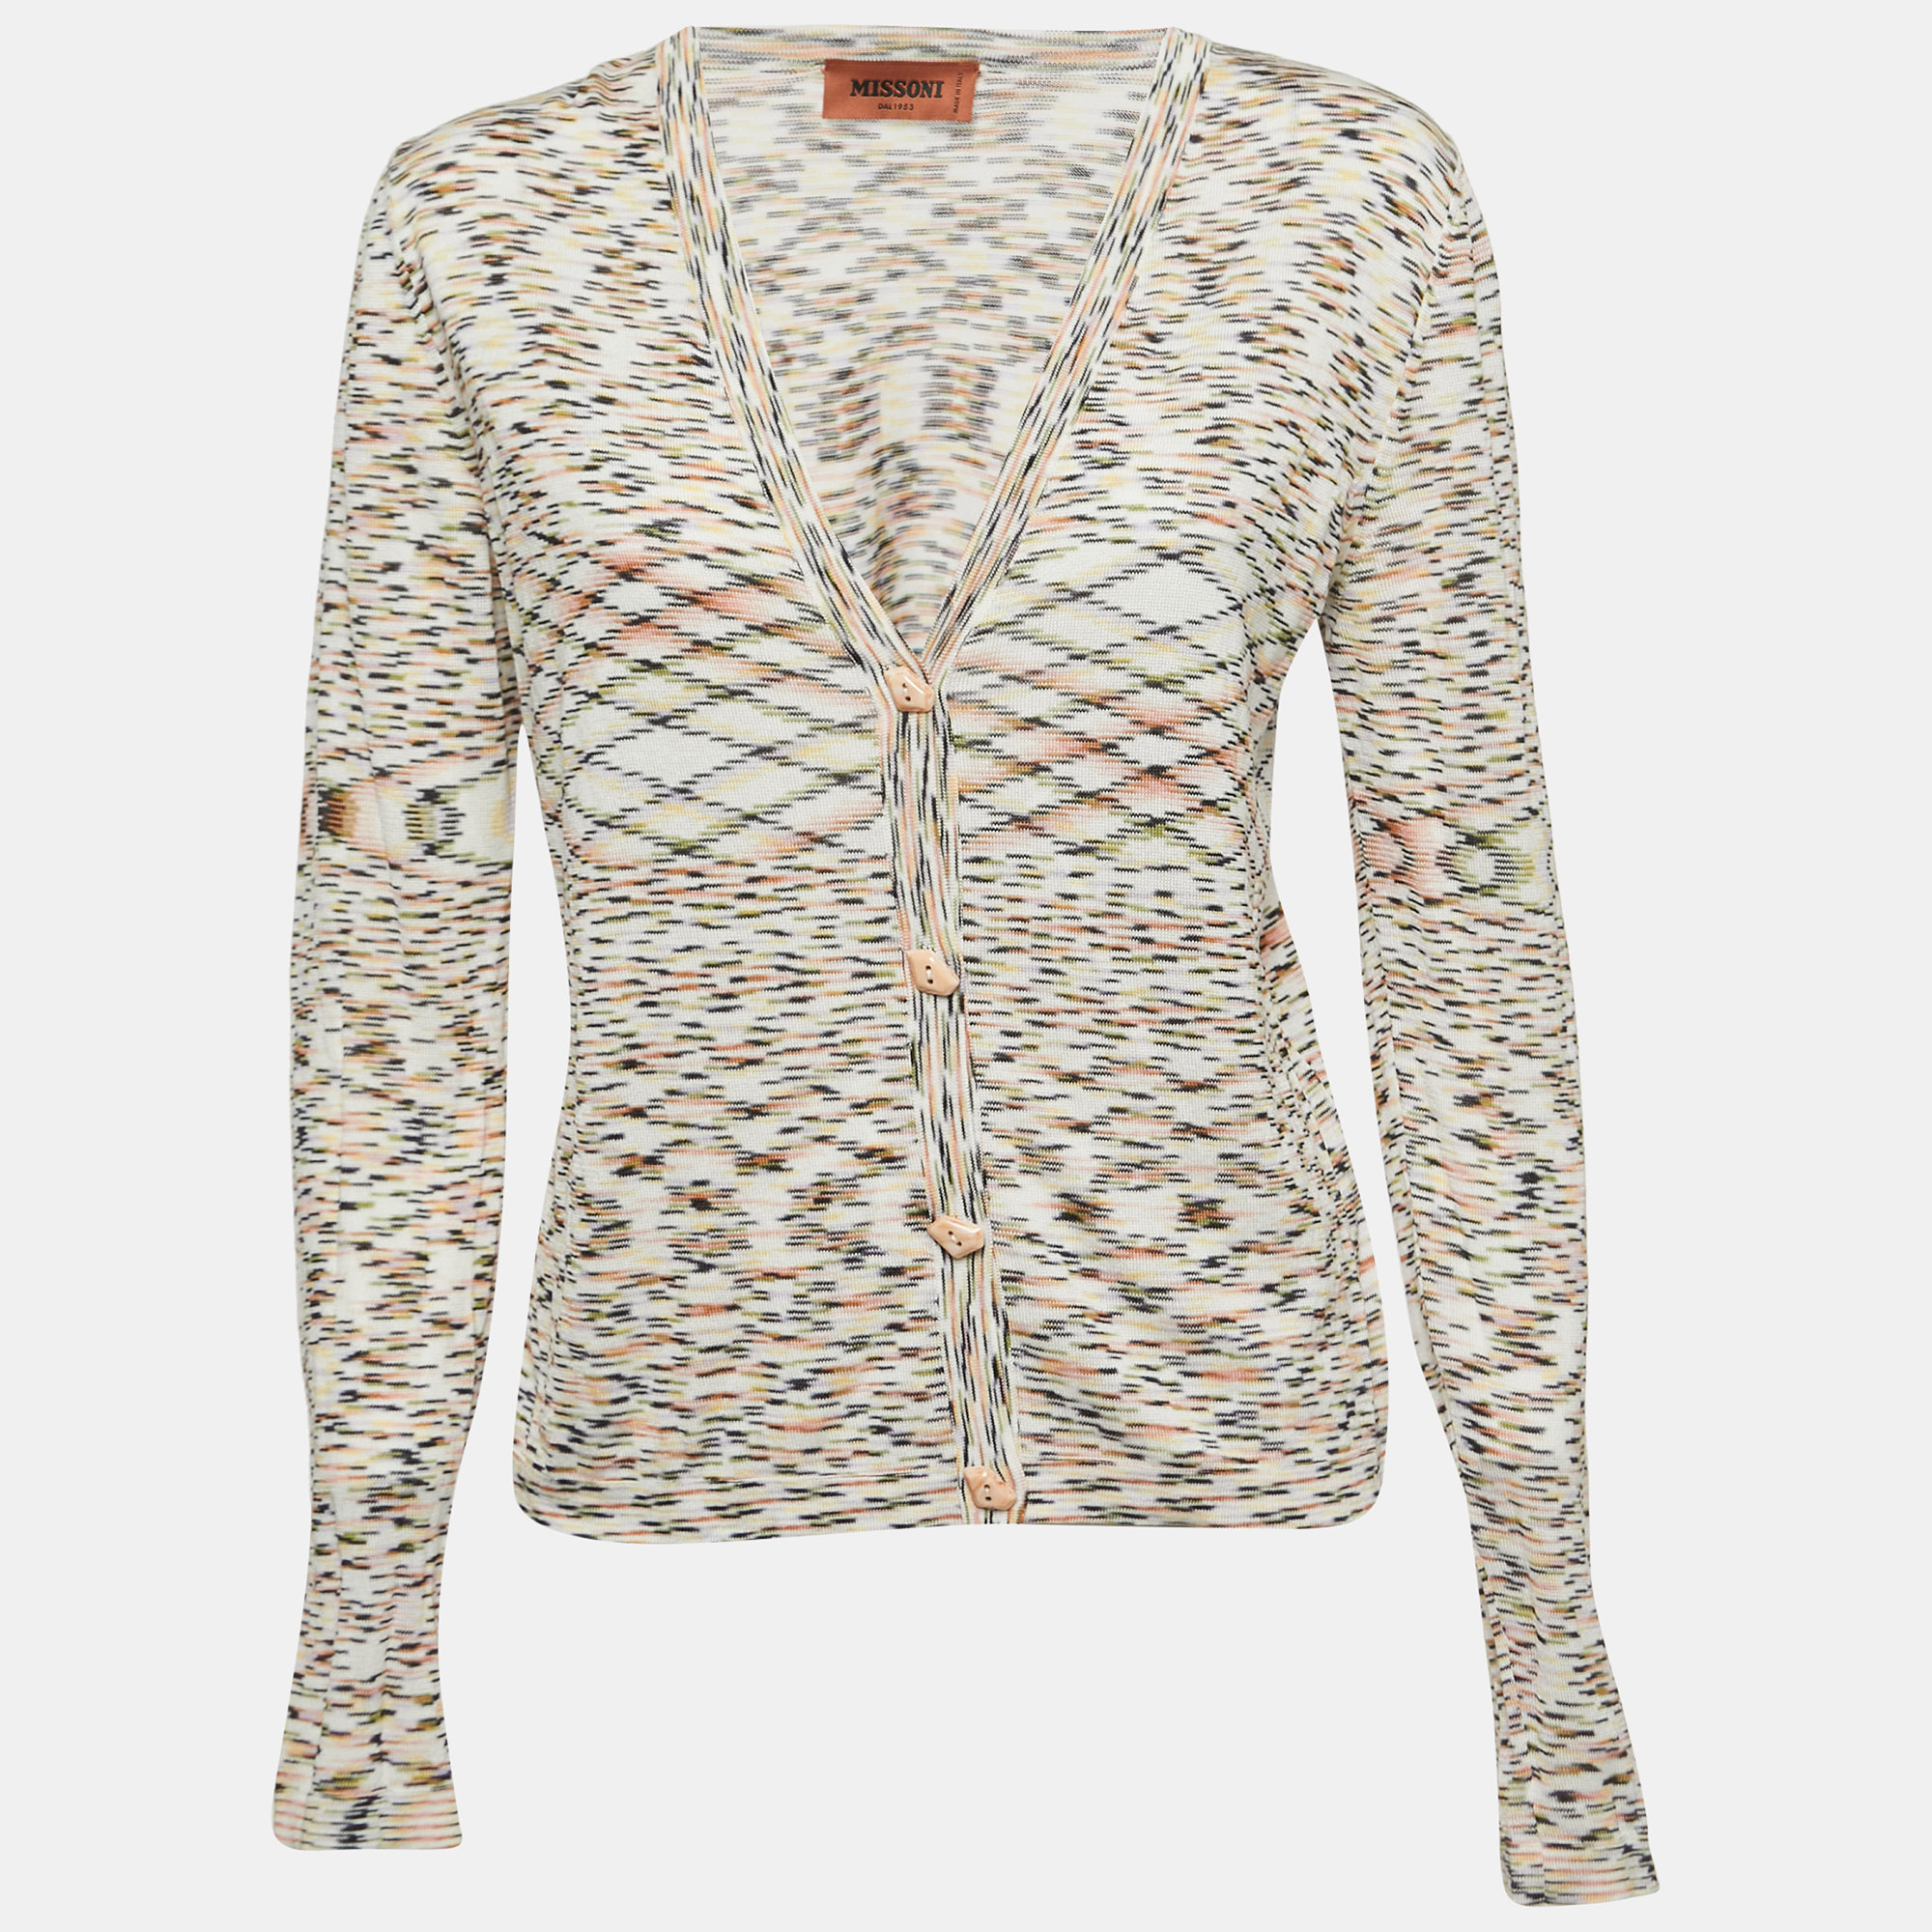 Missoni Multicolor Patterned Knit Buttoned Cardigan L